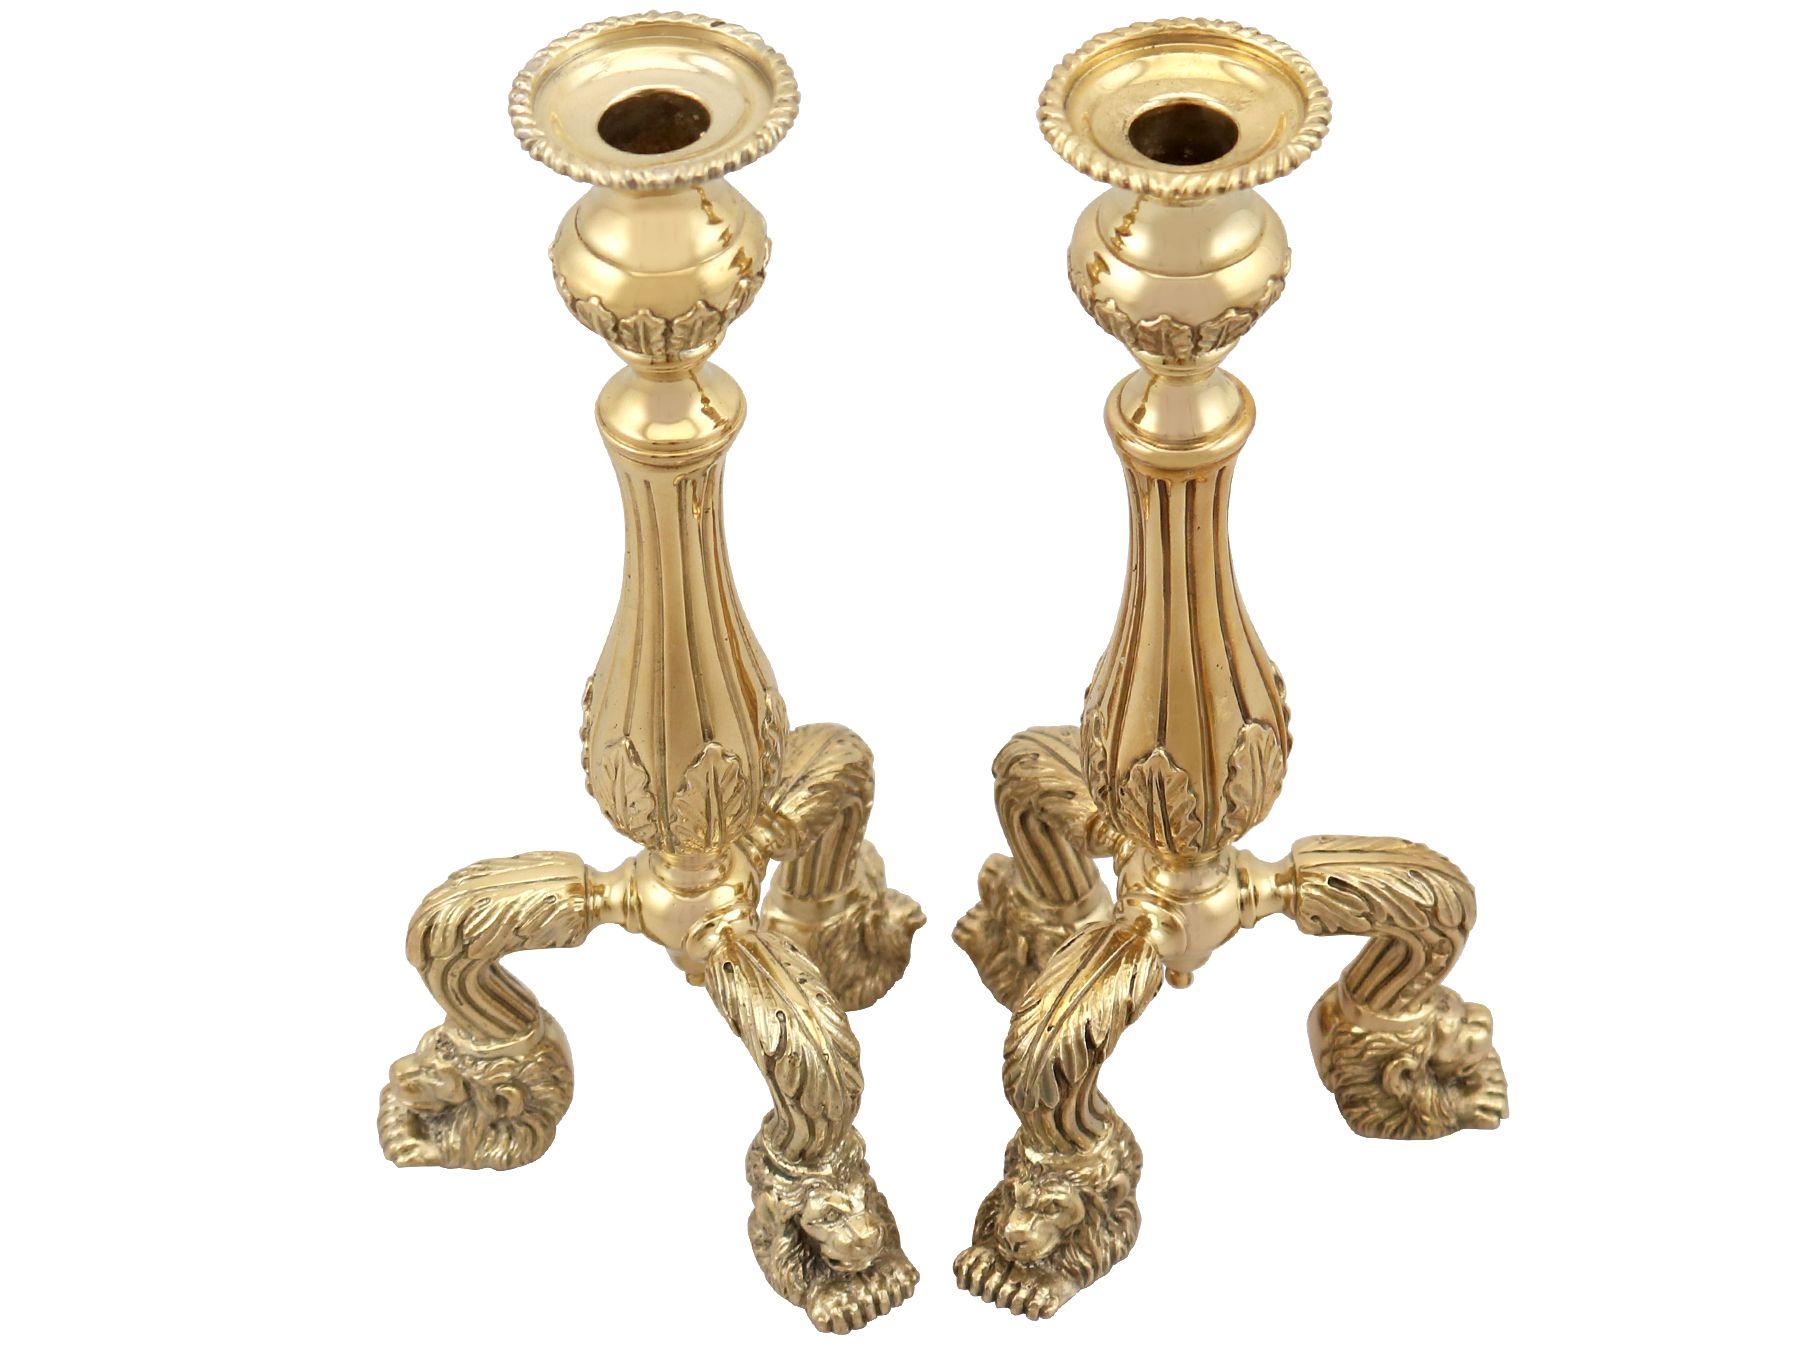 Vintage Sterling Silver Gilt Candle Holders In Excellent Condition For Sale In Jesmond, Newcastle Upon Tyne